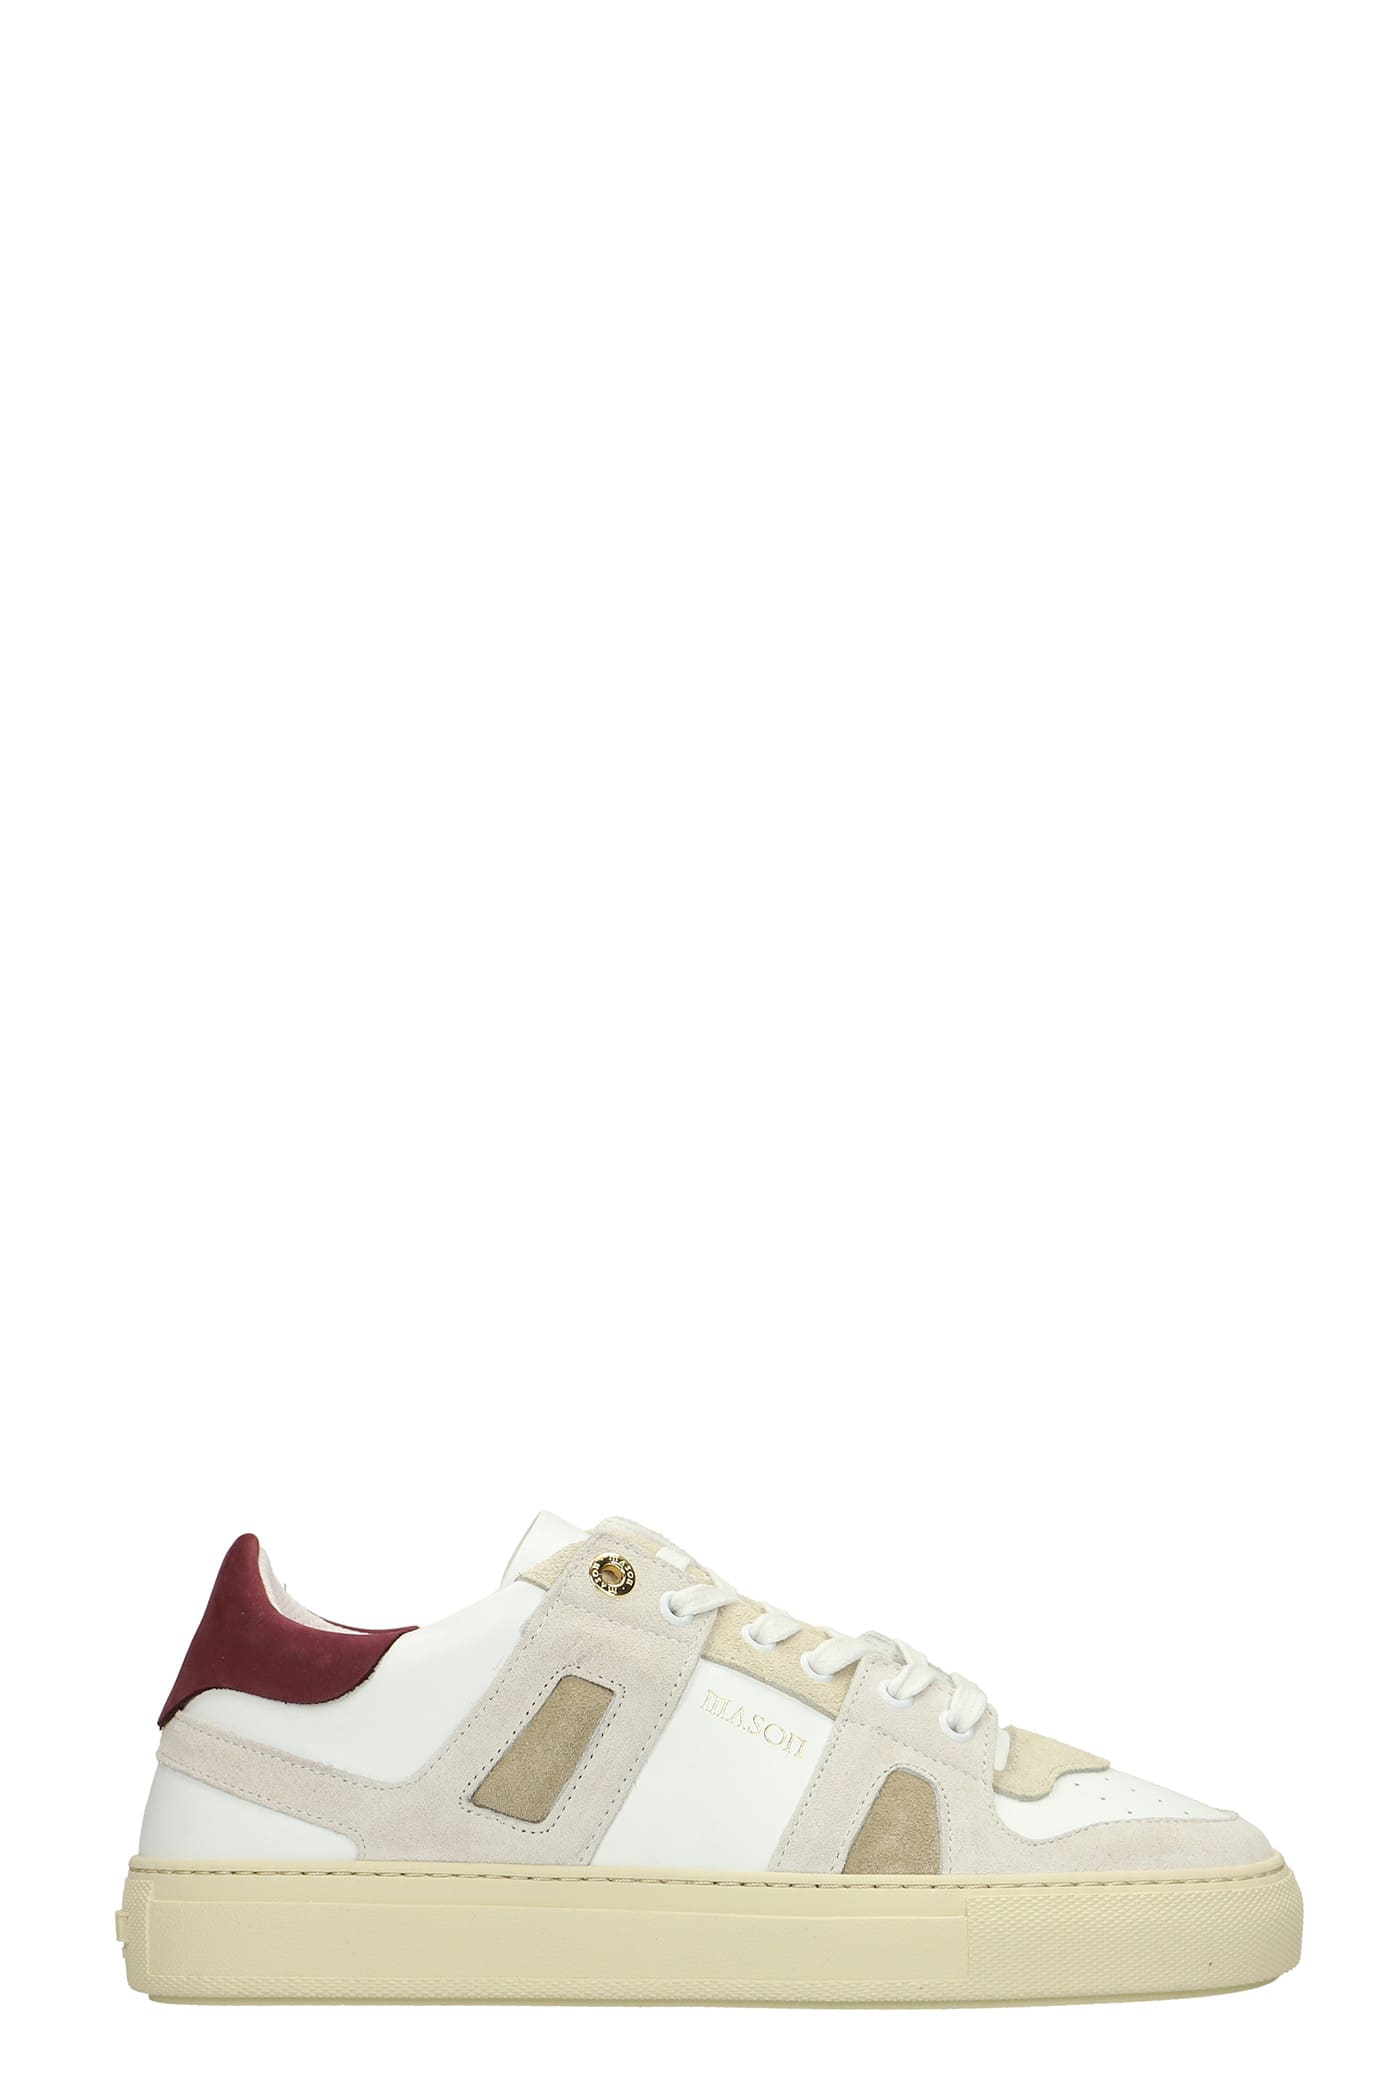 MASON GARMENTS BARI SNEAKERS IN WHITE SUEDE AND LEATHER